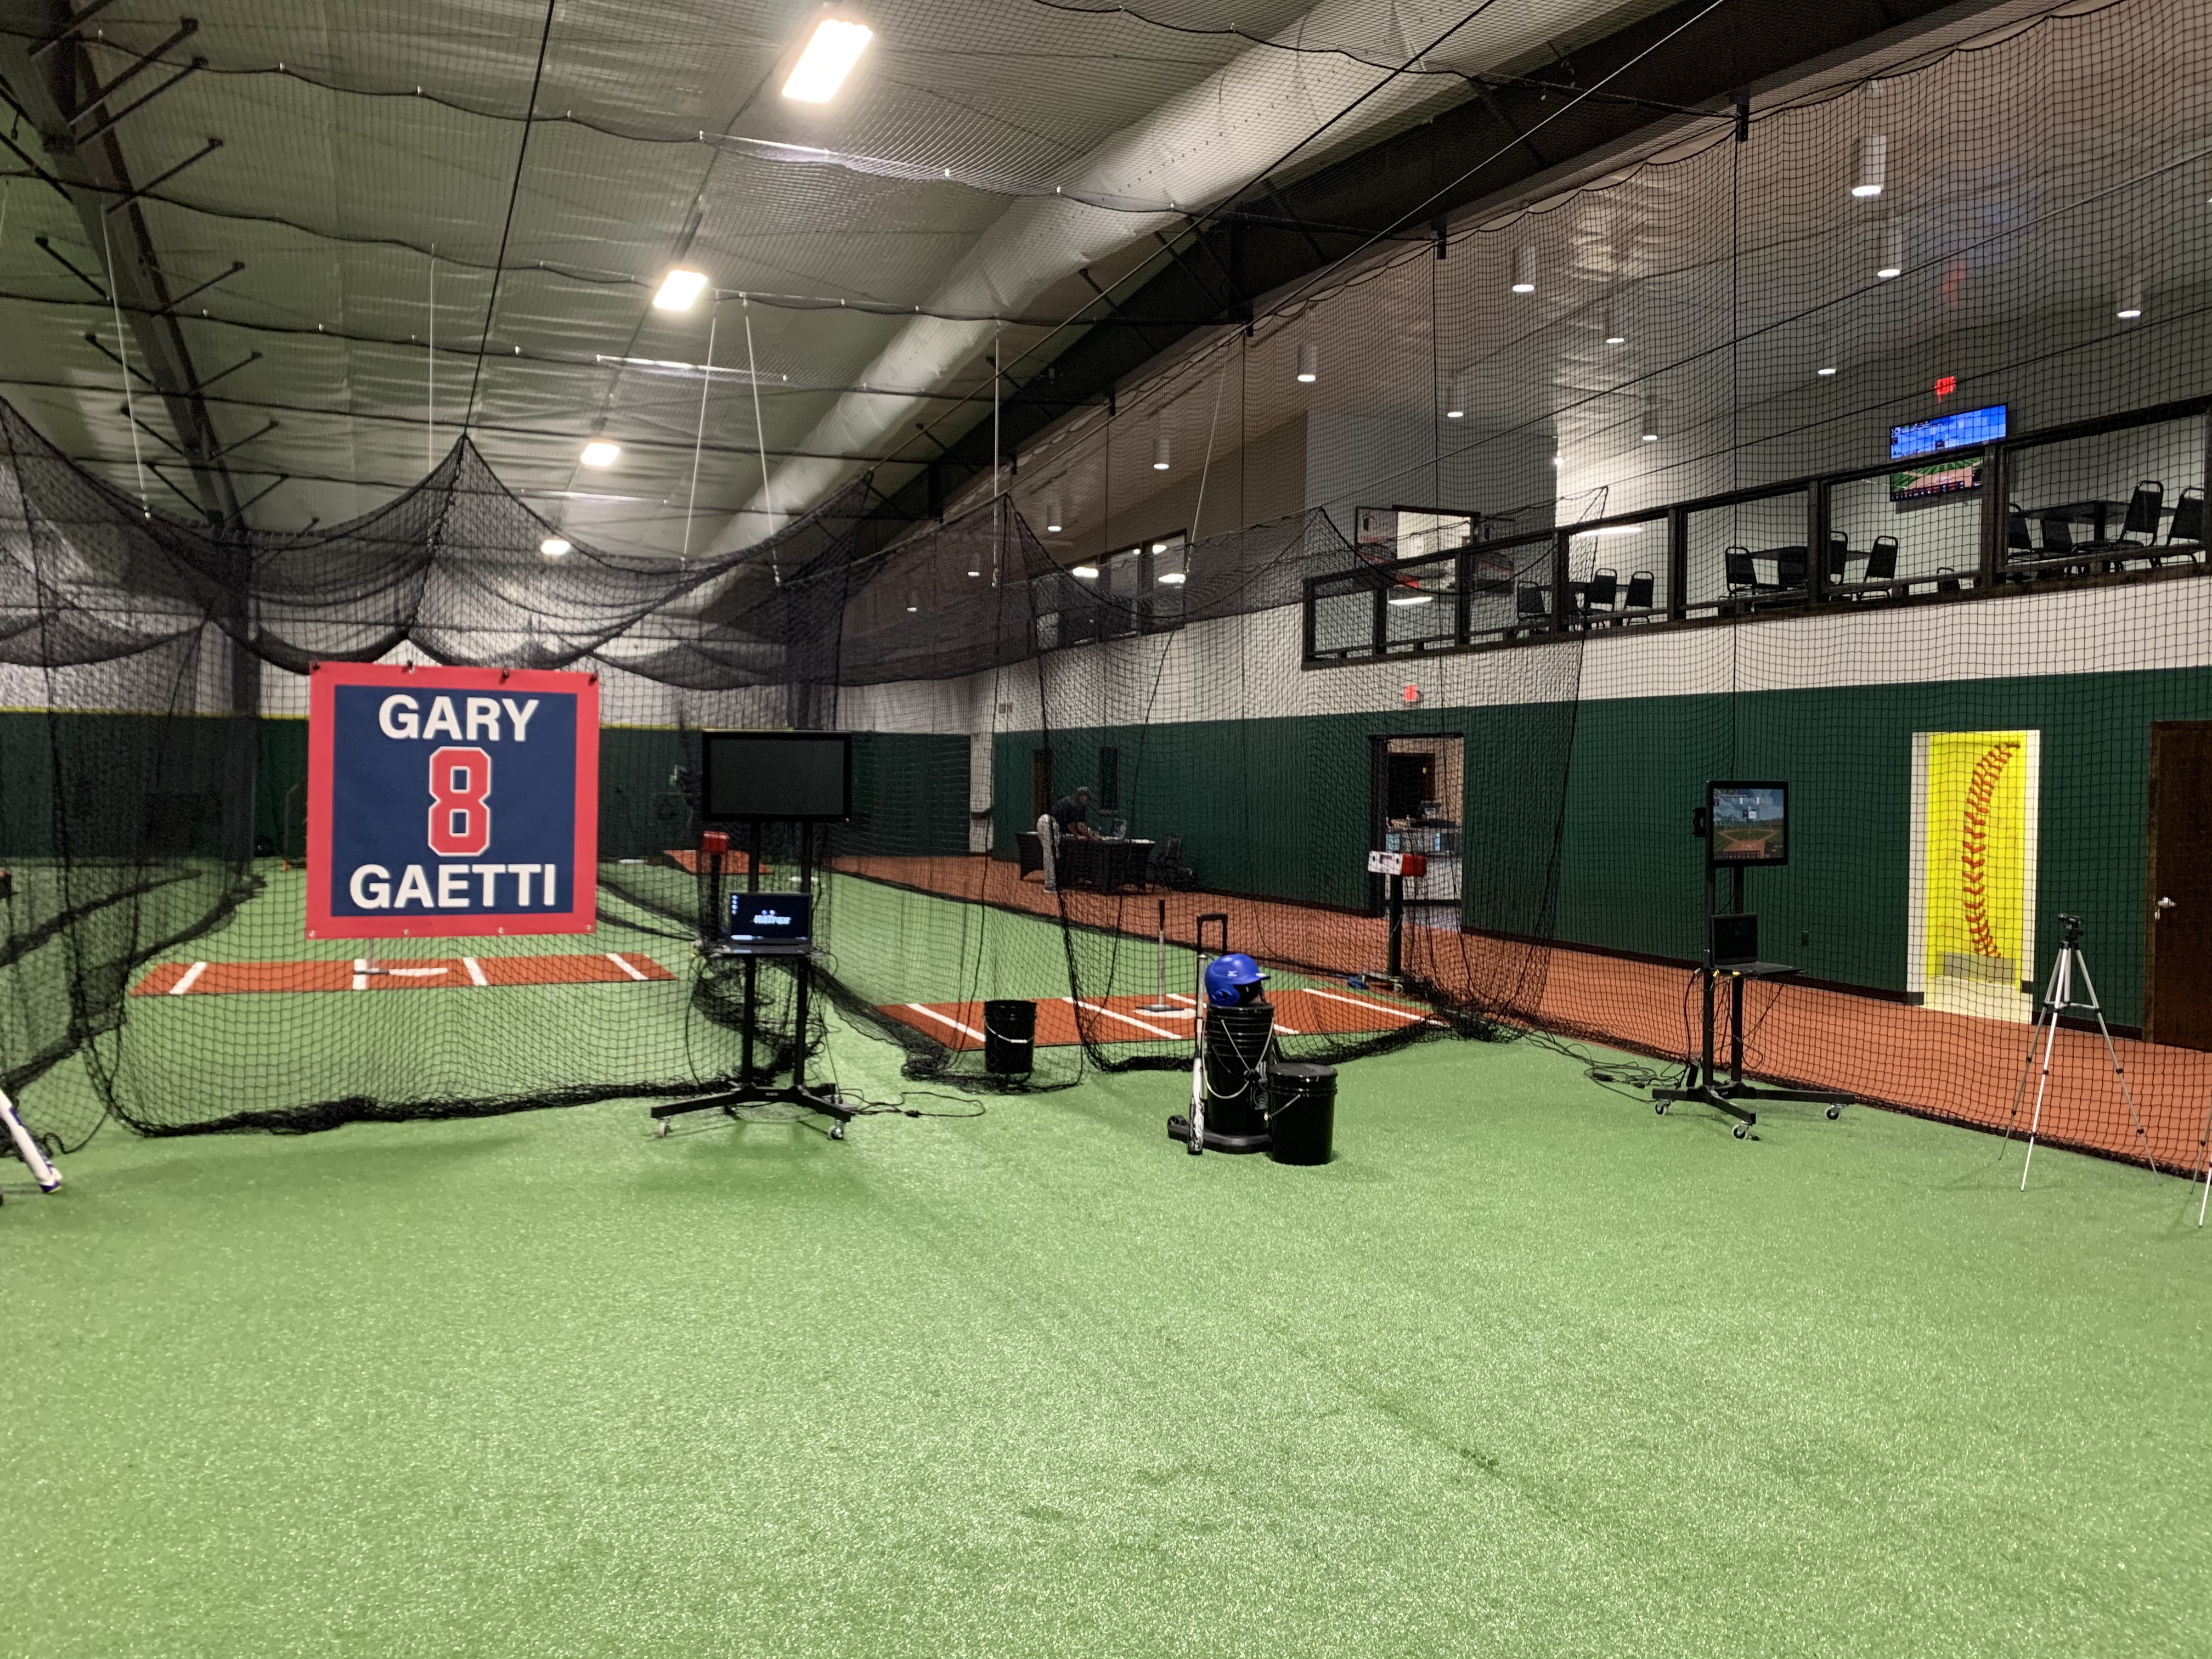 Downstate Illinois Road Trip Roundup - Athletic Training Facilities